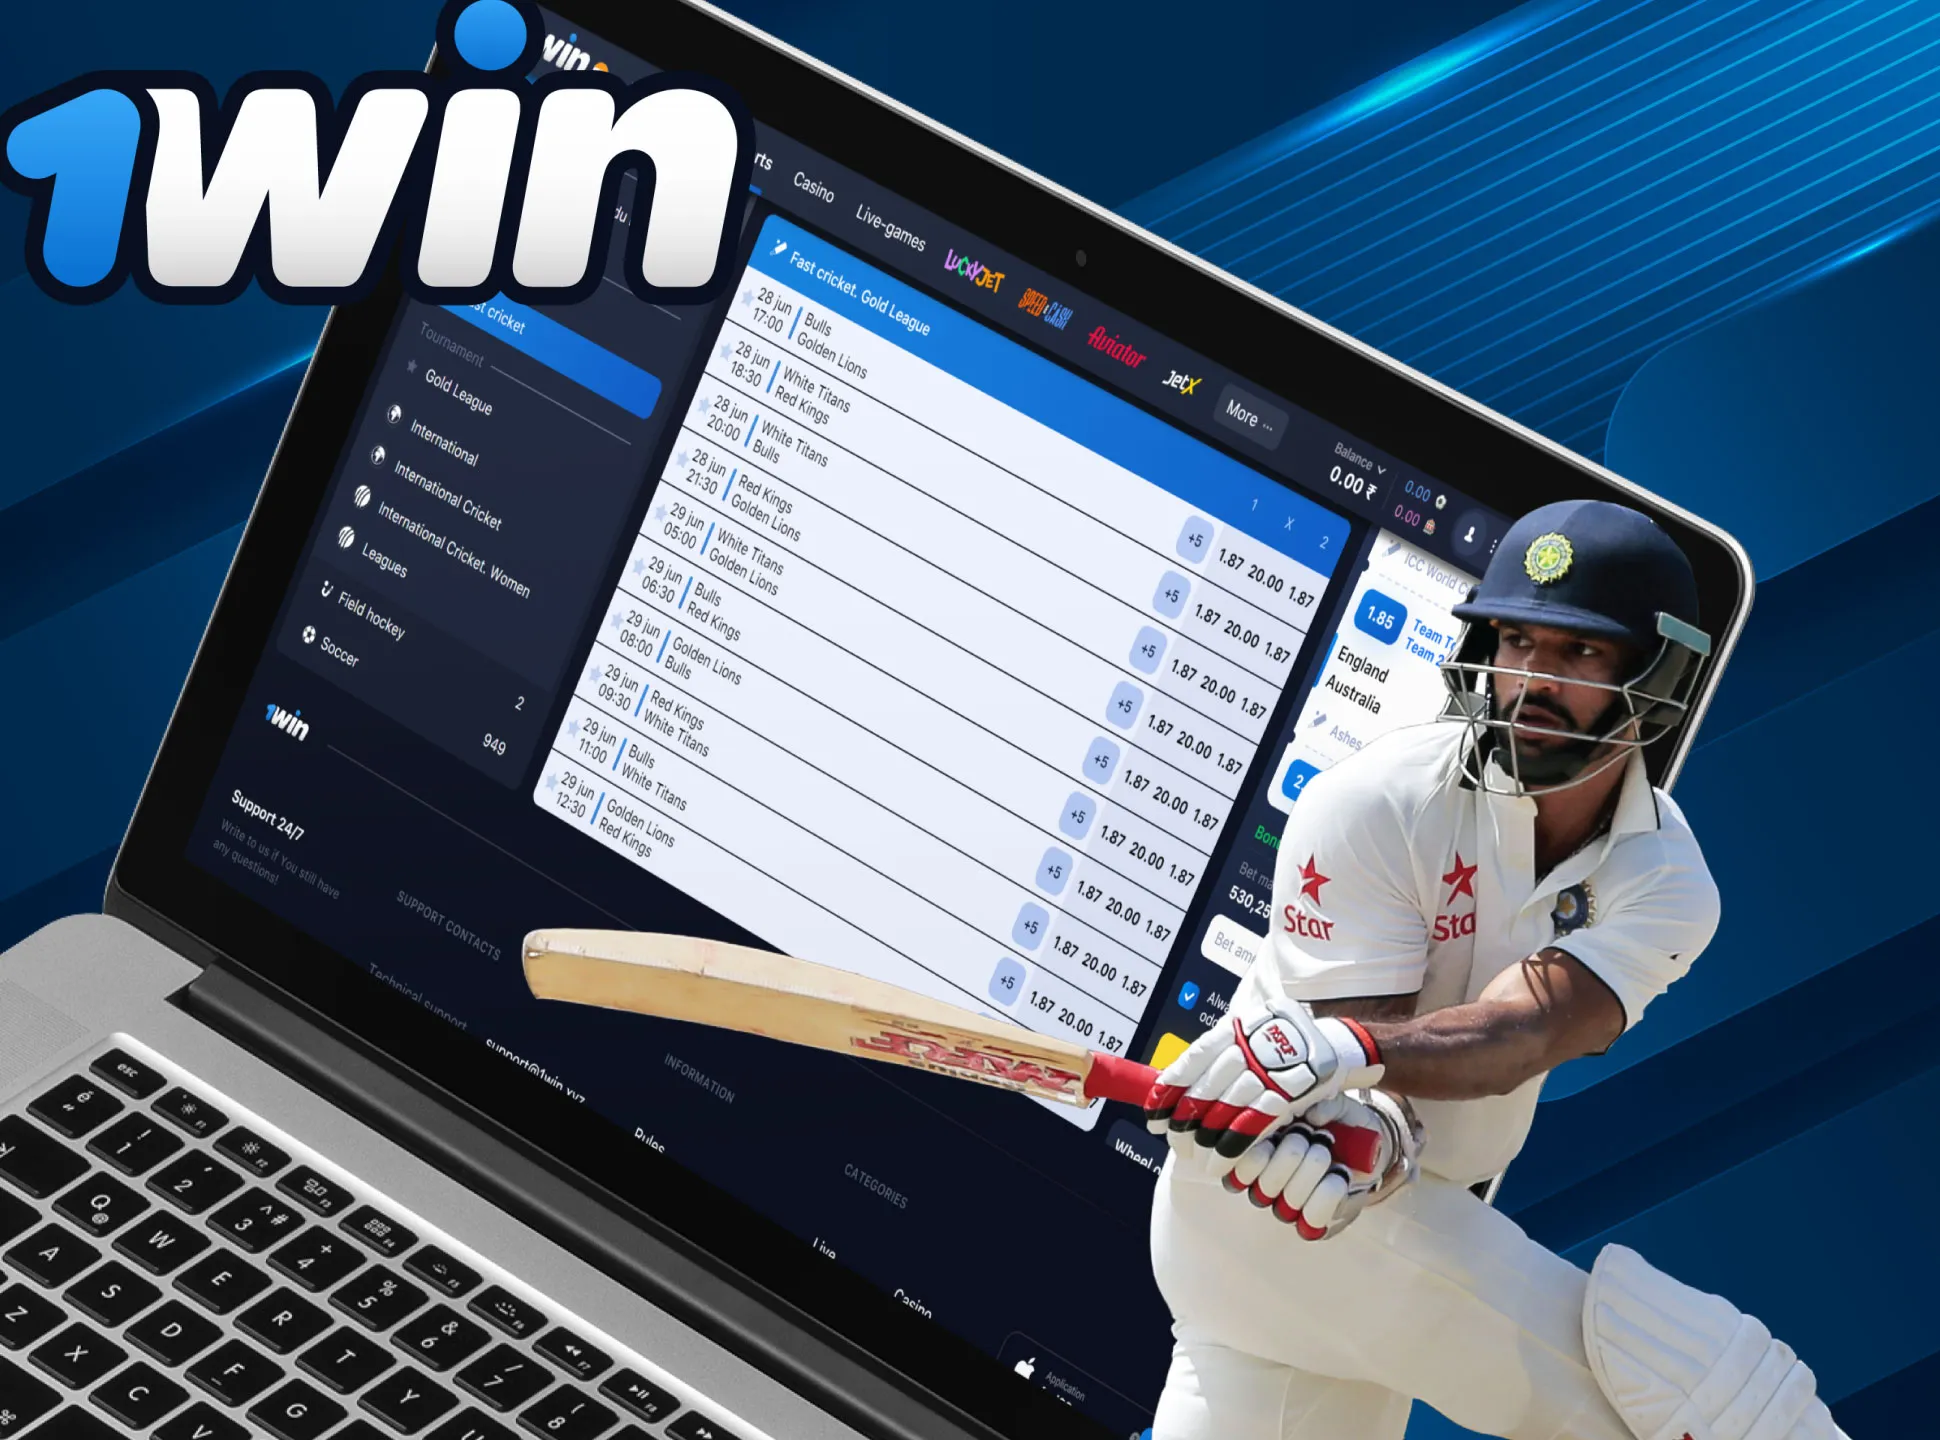 You will find various cricket markets and evens for betting on 1win.